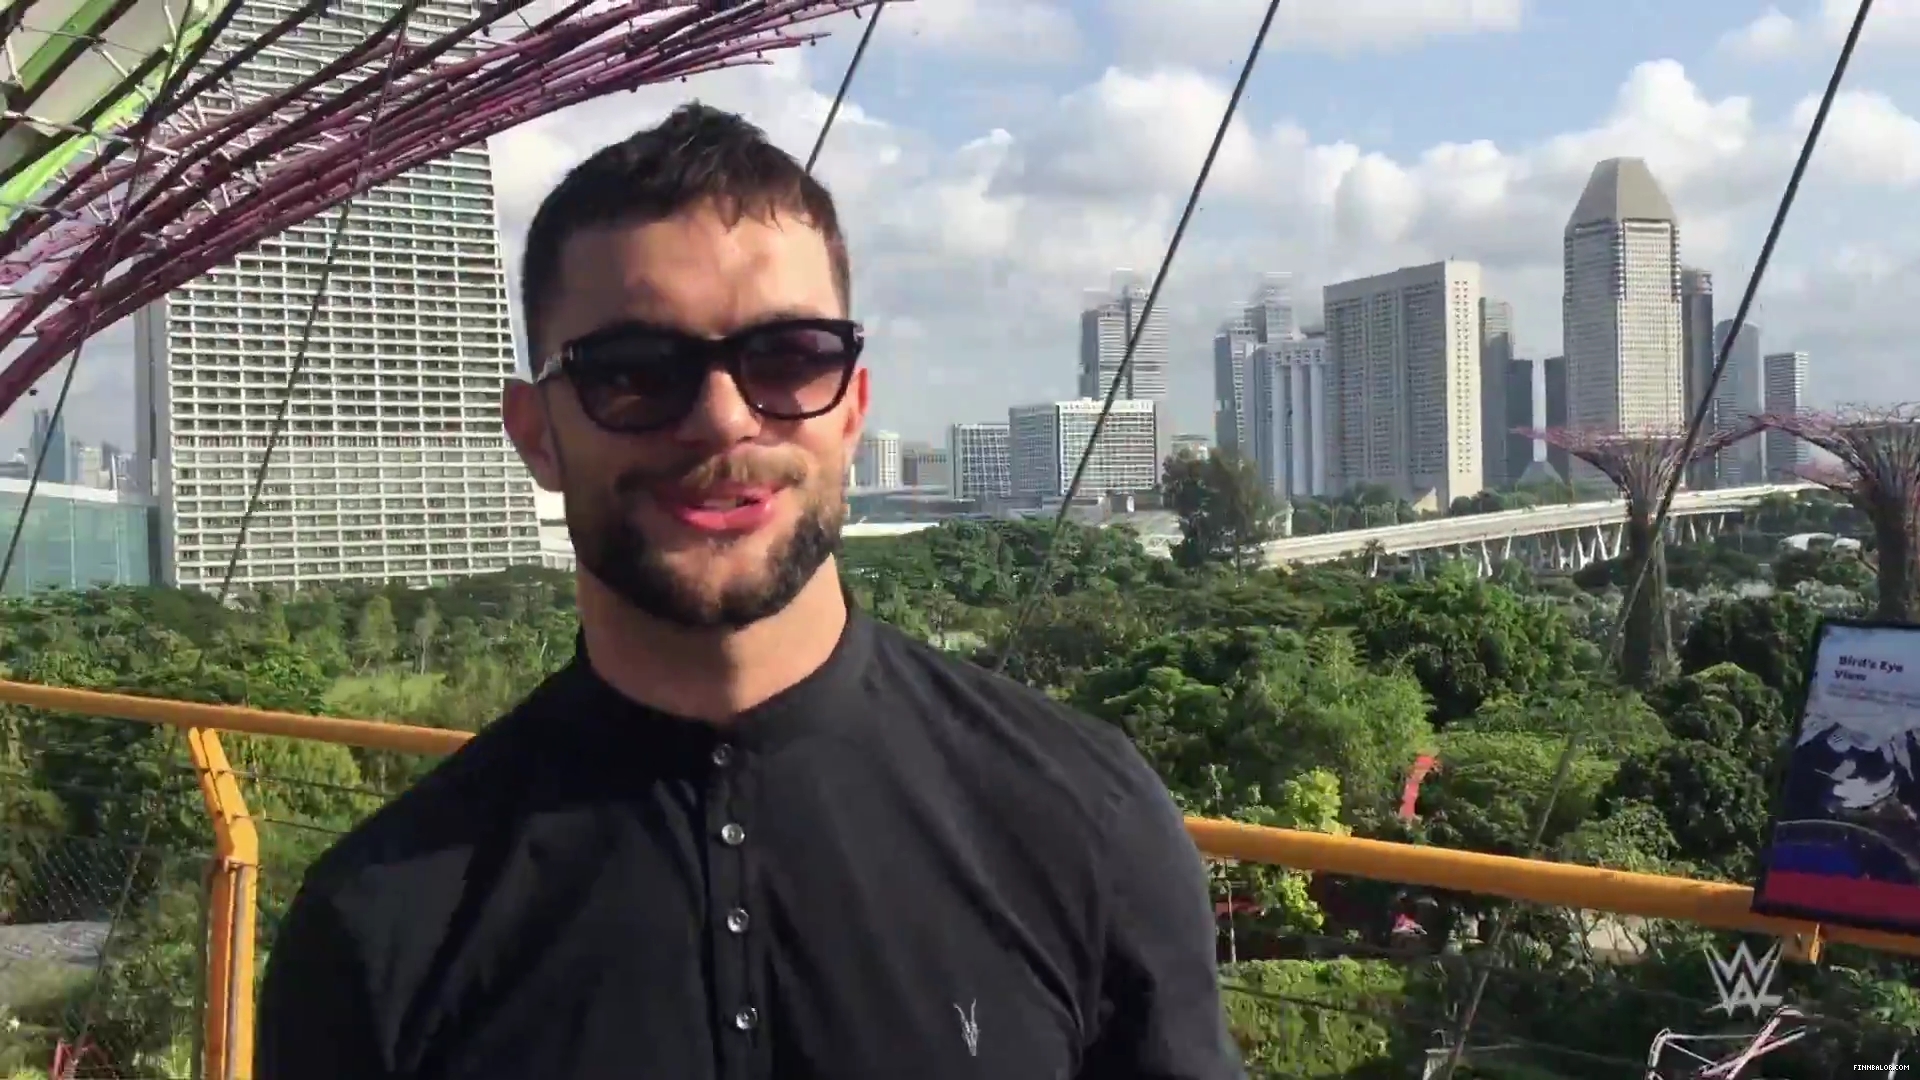 Finn_Balor_feels_like_he_is_in__Star_Wars__while_touring_Singapore_s_Supertree__mp40037.jpg